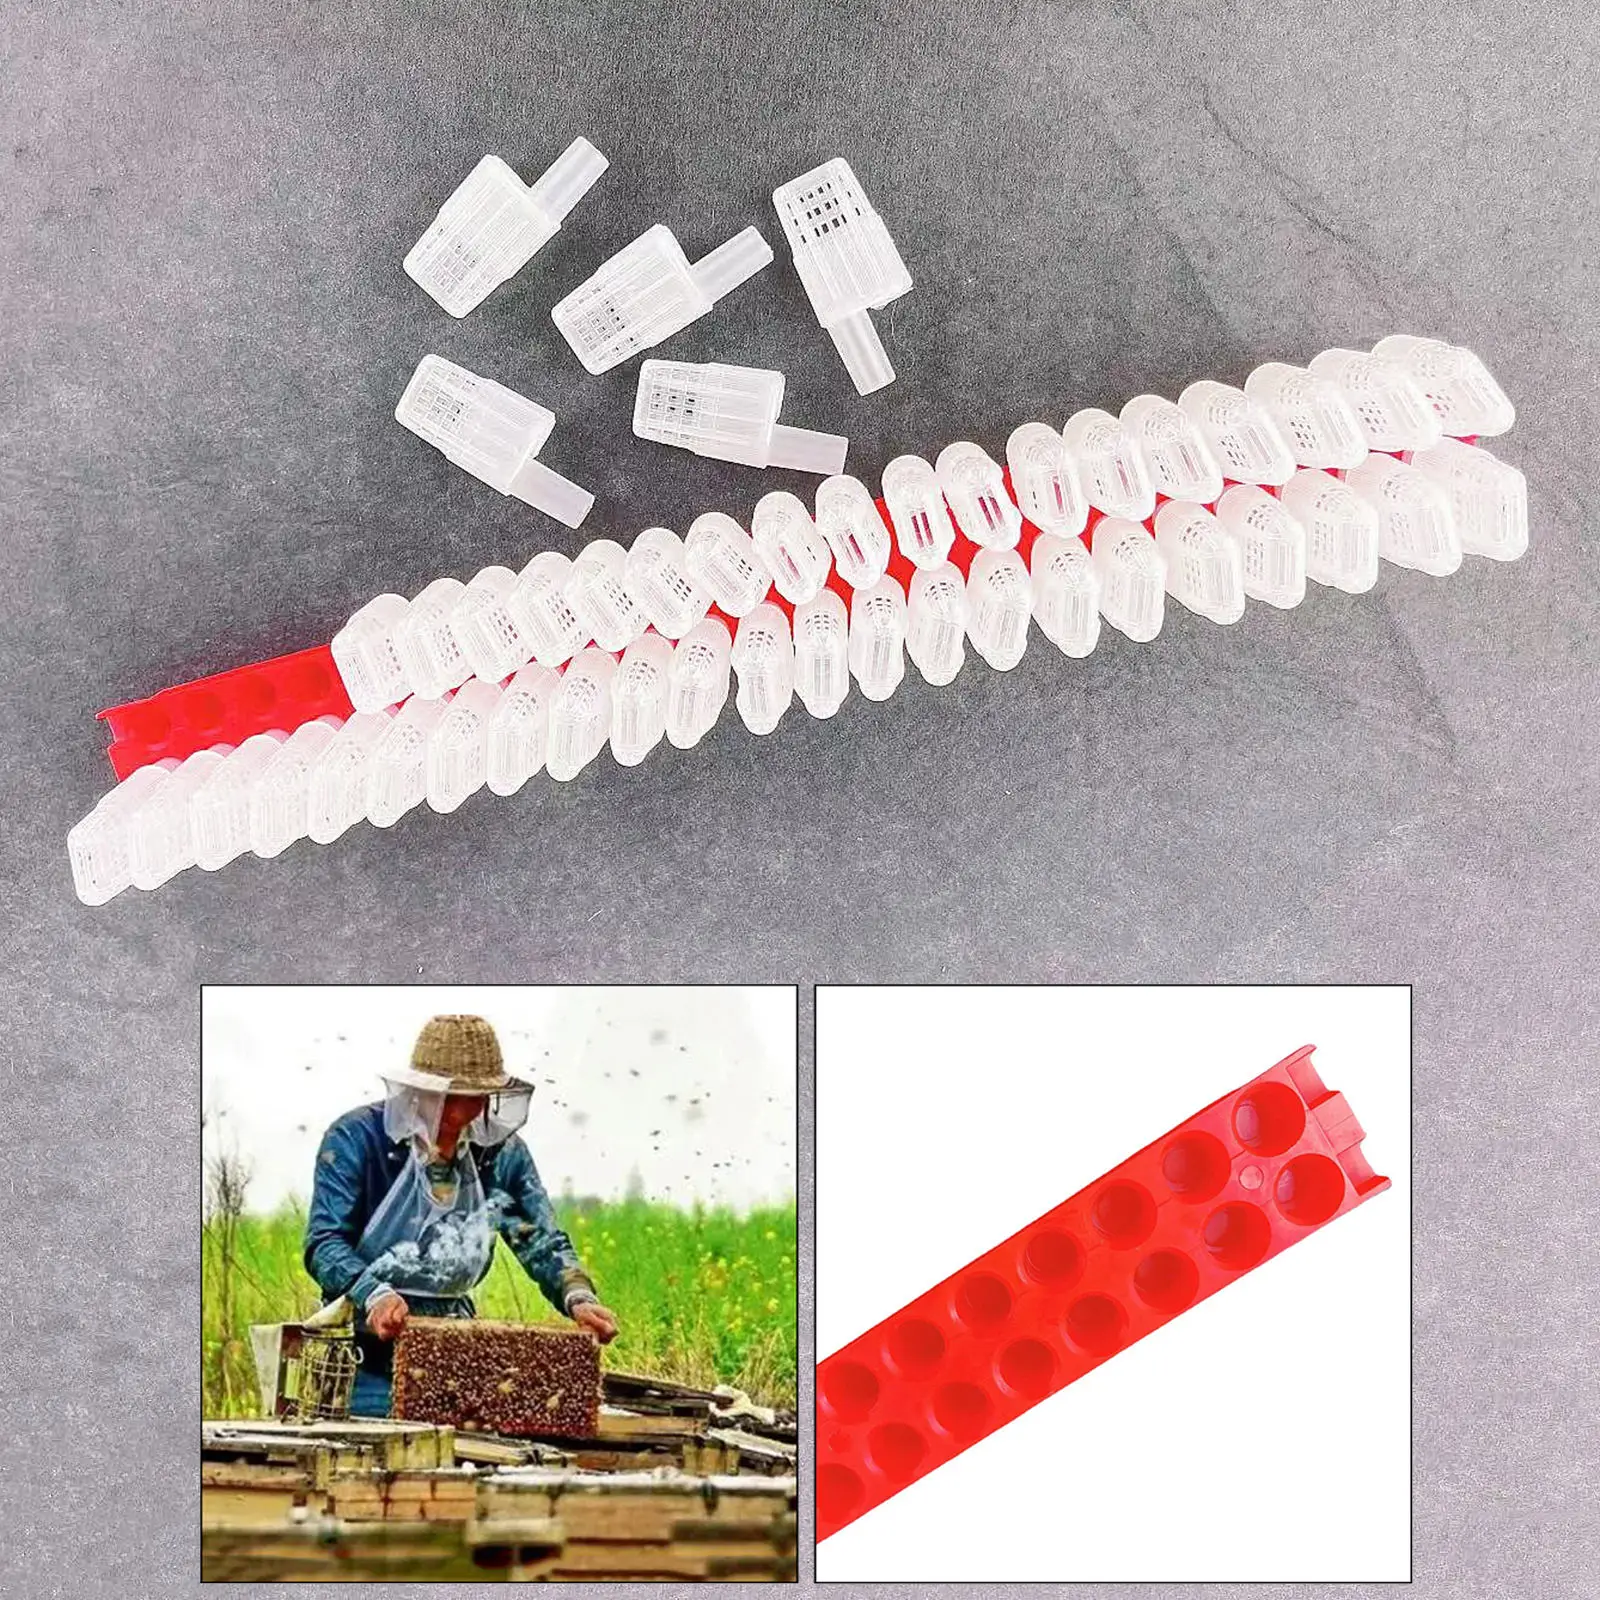 46Pcs Queen Bee Transporting Moving Isolator Hive Cage Catcher Protection Case w/ Transportation Strip Beekeeping Supplies